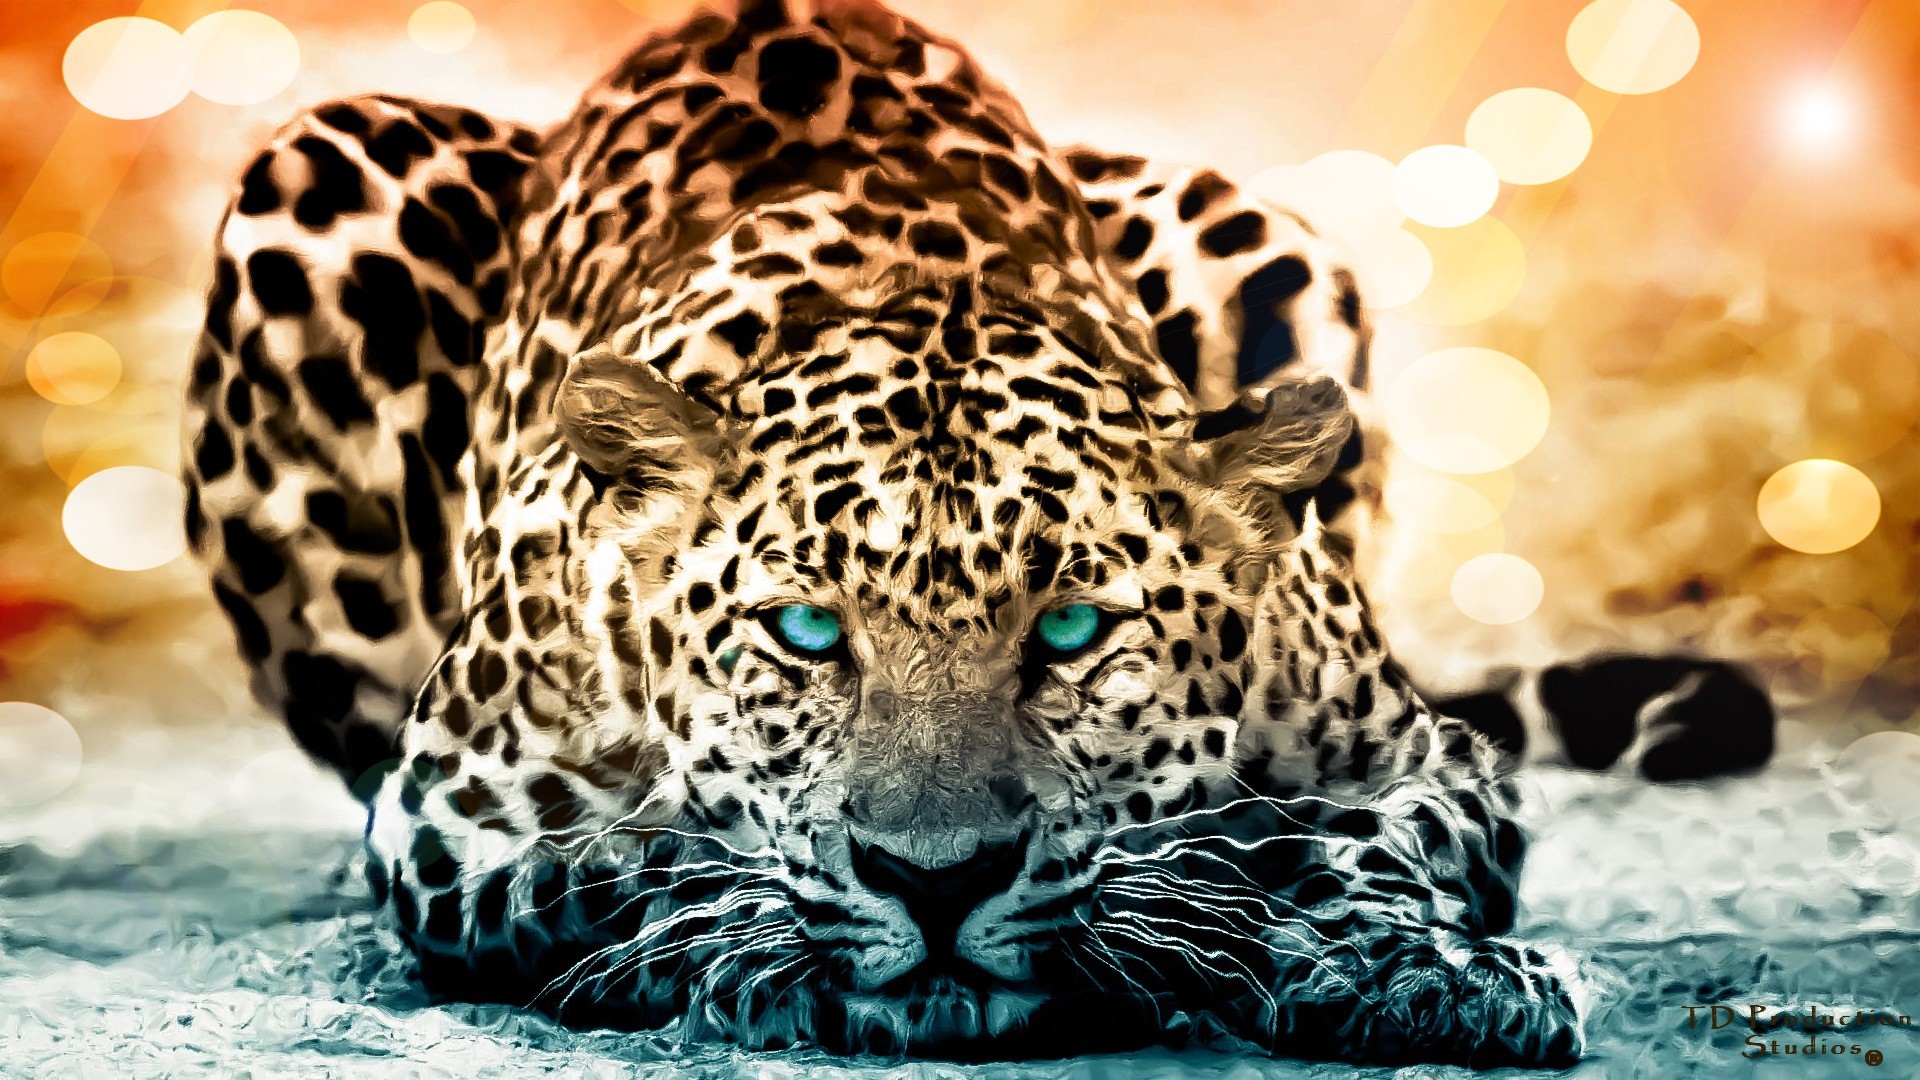 1920x1080 Cool Wild Animal Wallpapers High Resolution